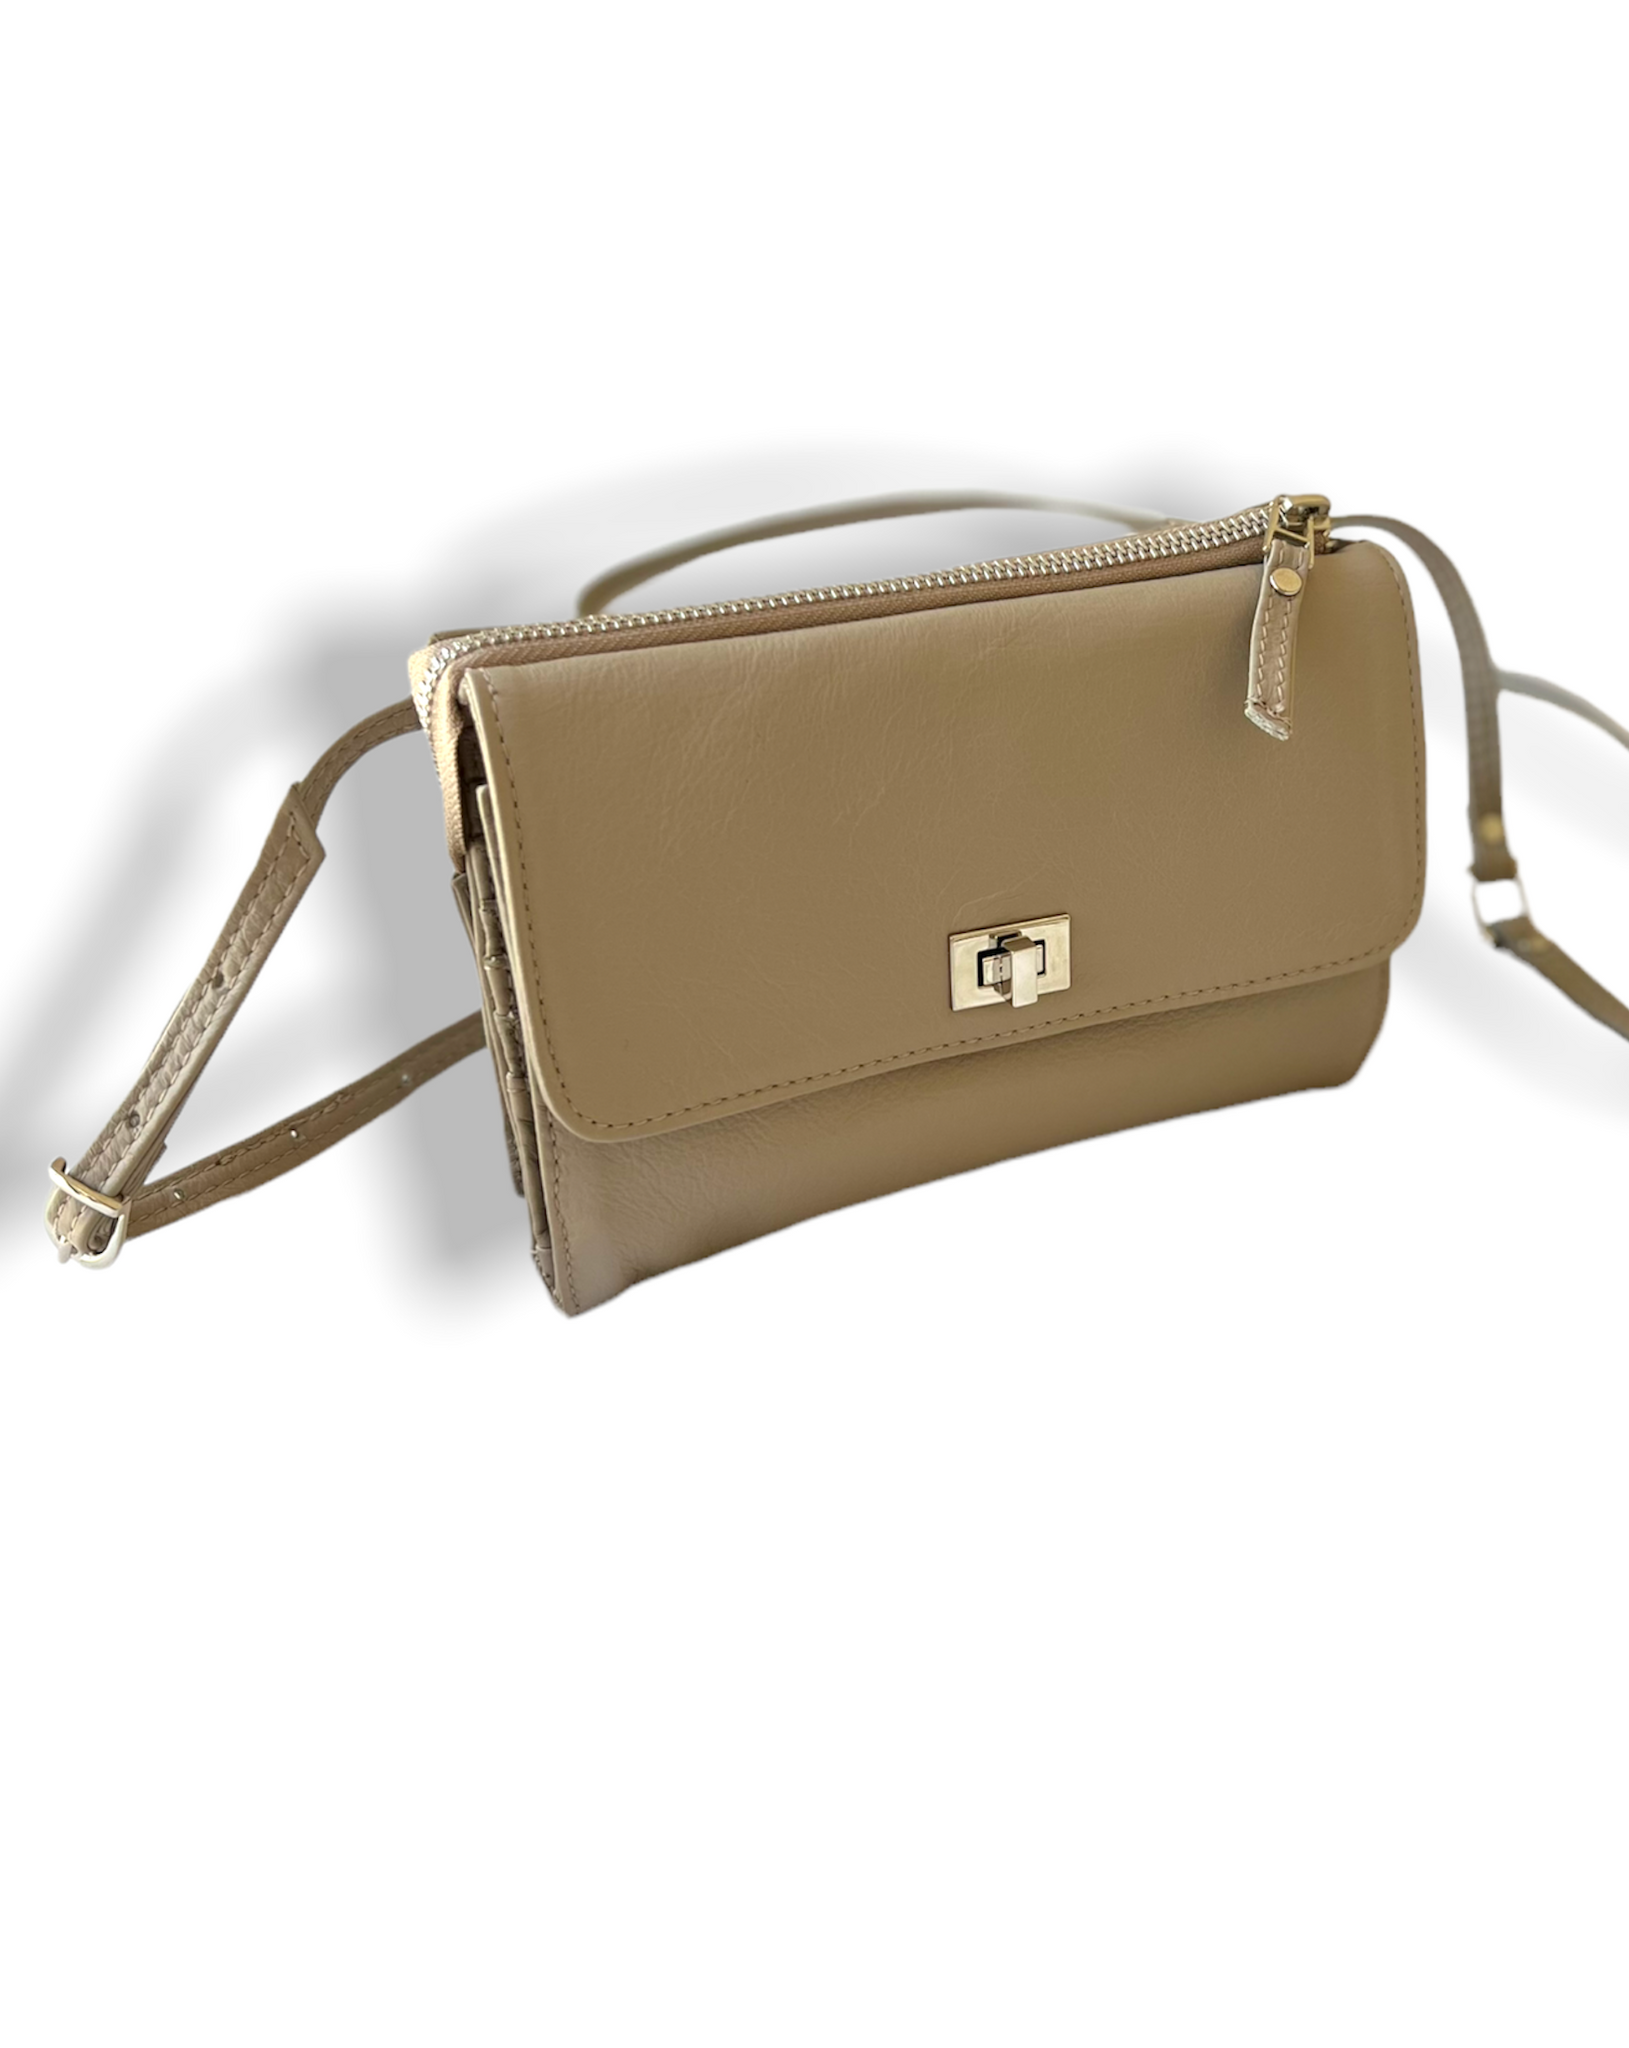 Taupe leather utility handbag, made in Cape Town South Africa. 